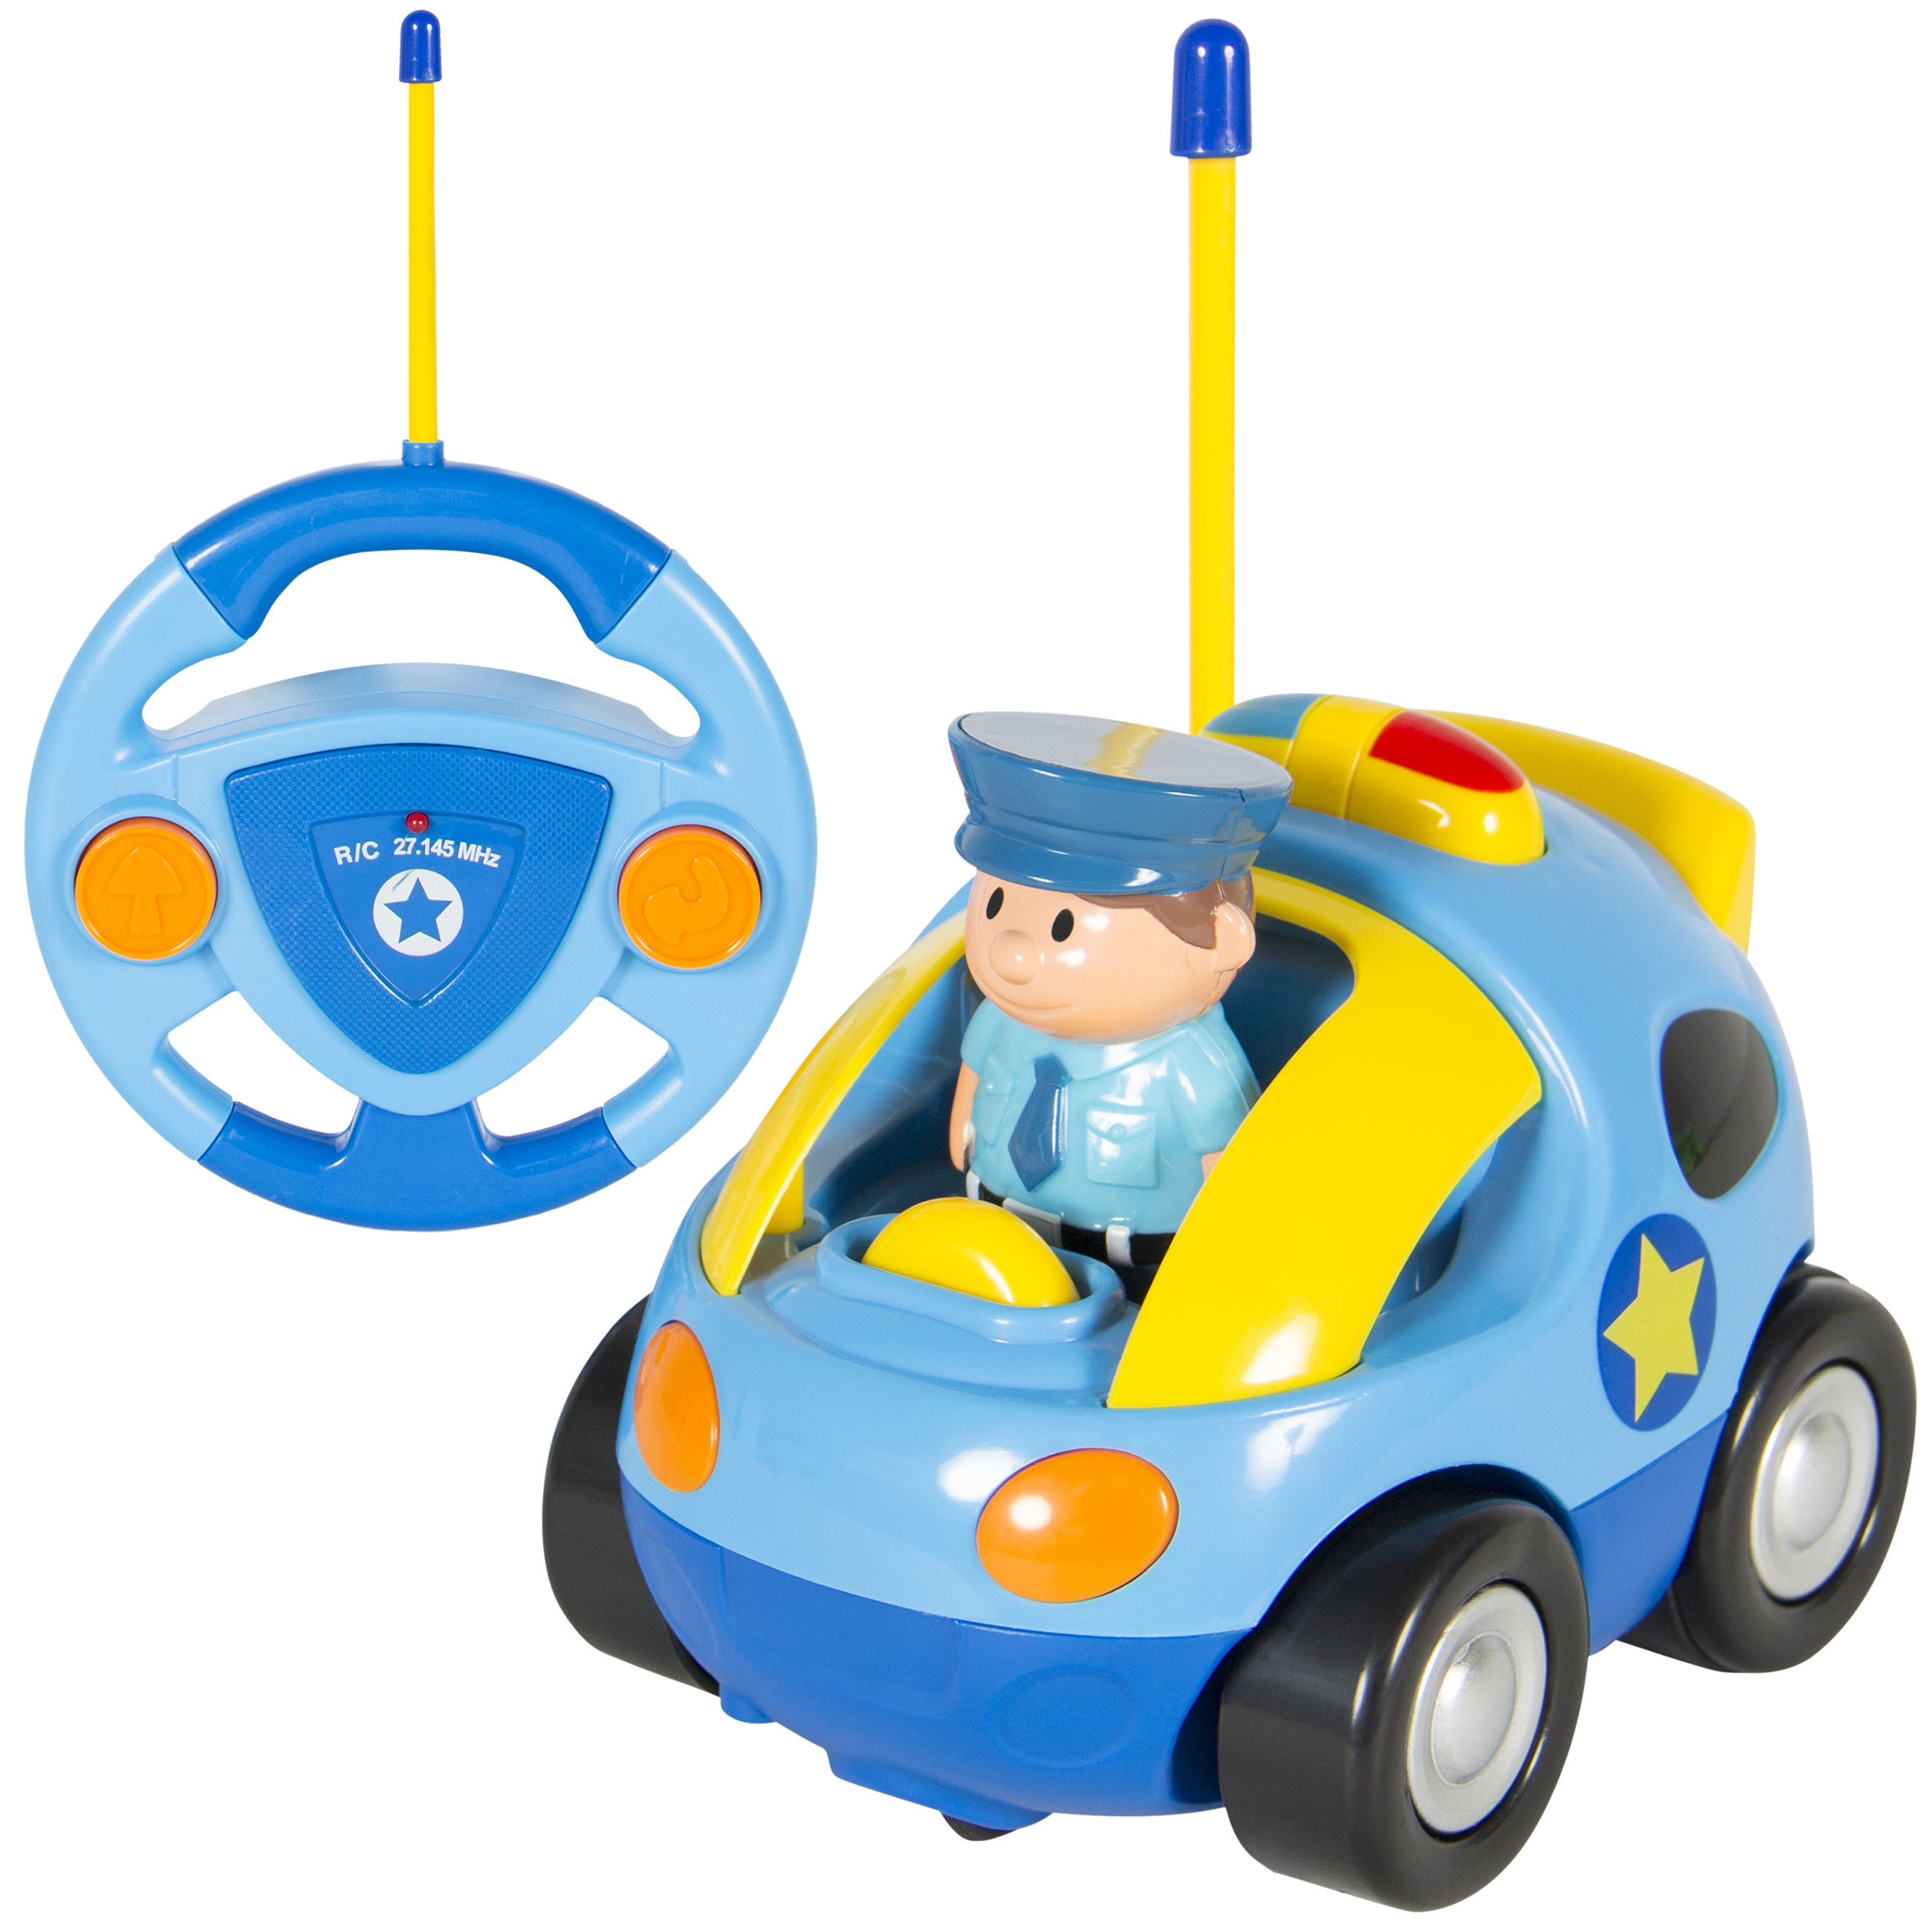 Best Choice Products 2-Channel Beginners Kids Remote Control Cartoon Police Car - Blue/Yellow - image 1 of 5